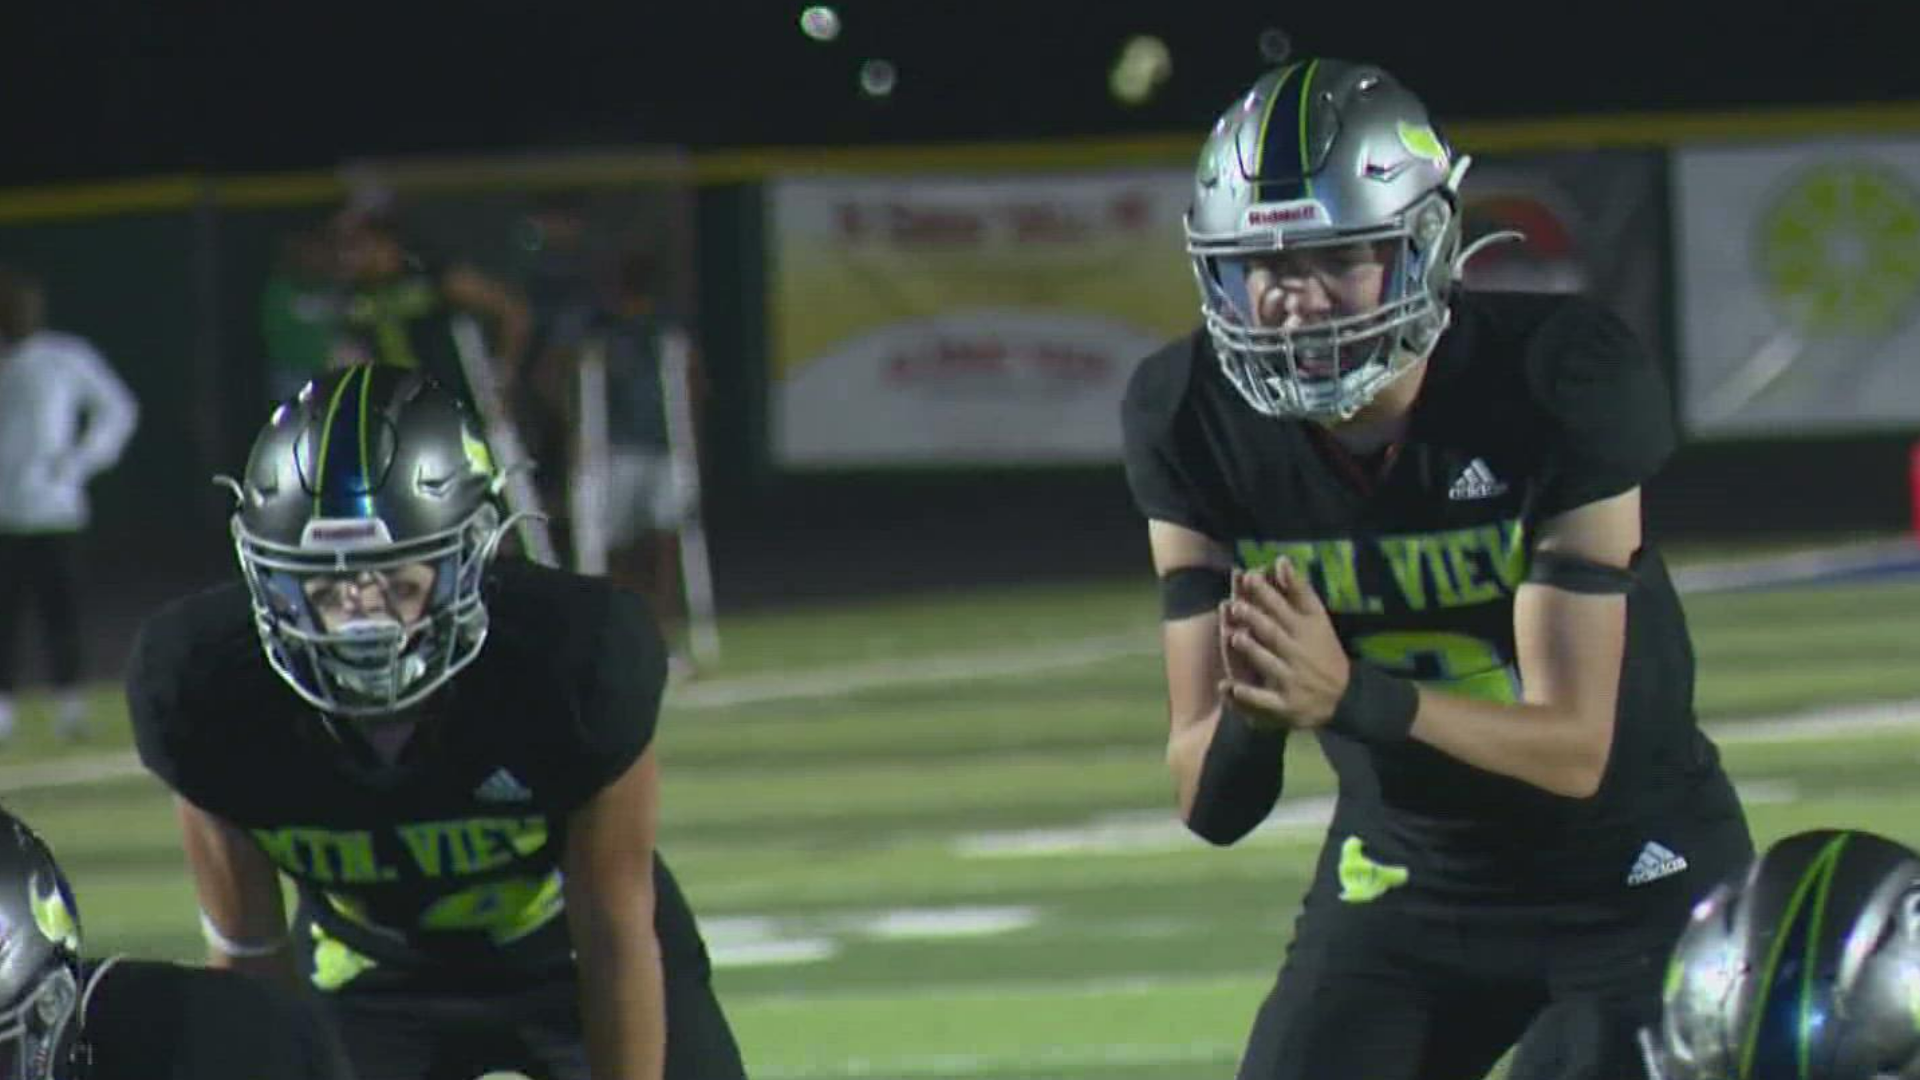 The Mountain View Mavericks (2-2) earned their second-straight win Friday night, taking down the Borah Lions (2-3) at home 37-7.